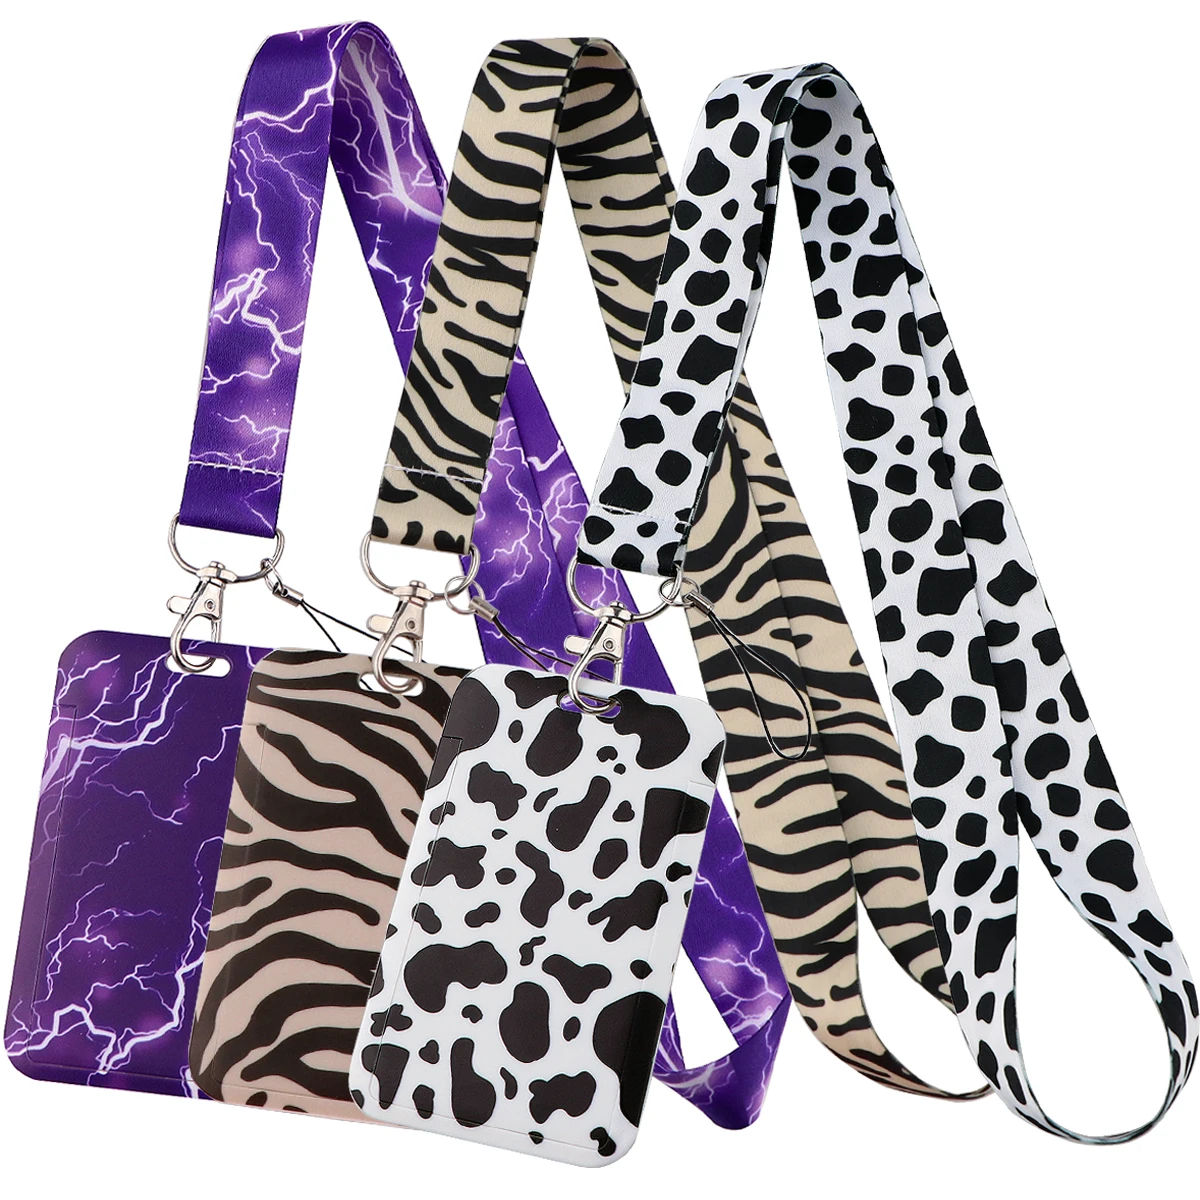 Zebra Neck Strap Lanyards for keys ID Card Gym Cell Phone Straps USB Badge Holder DIY Phone Hanging Rope Nurse Cow Lanyard grey s anatomy doctor nurse neck strap lanyard for keys lanyard card id holder key chain for gifts keychain key ring